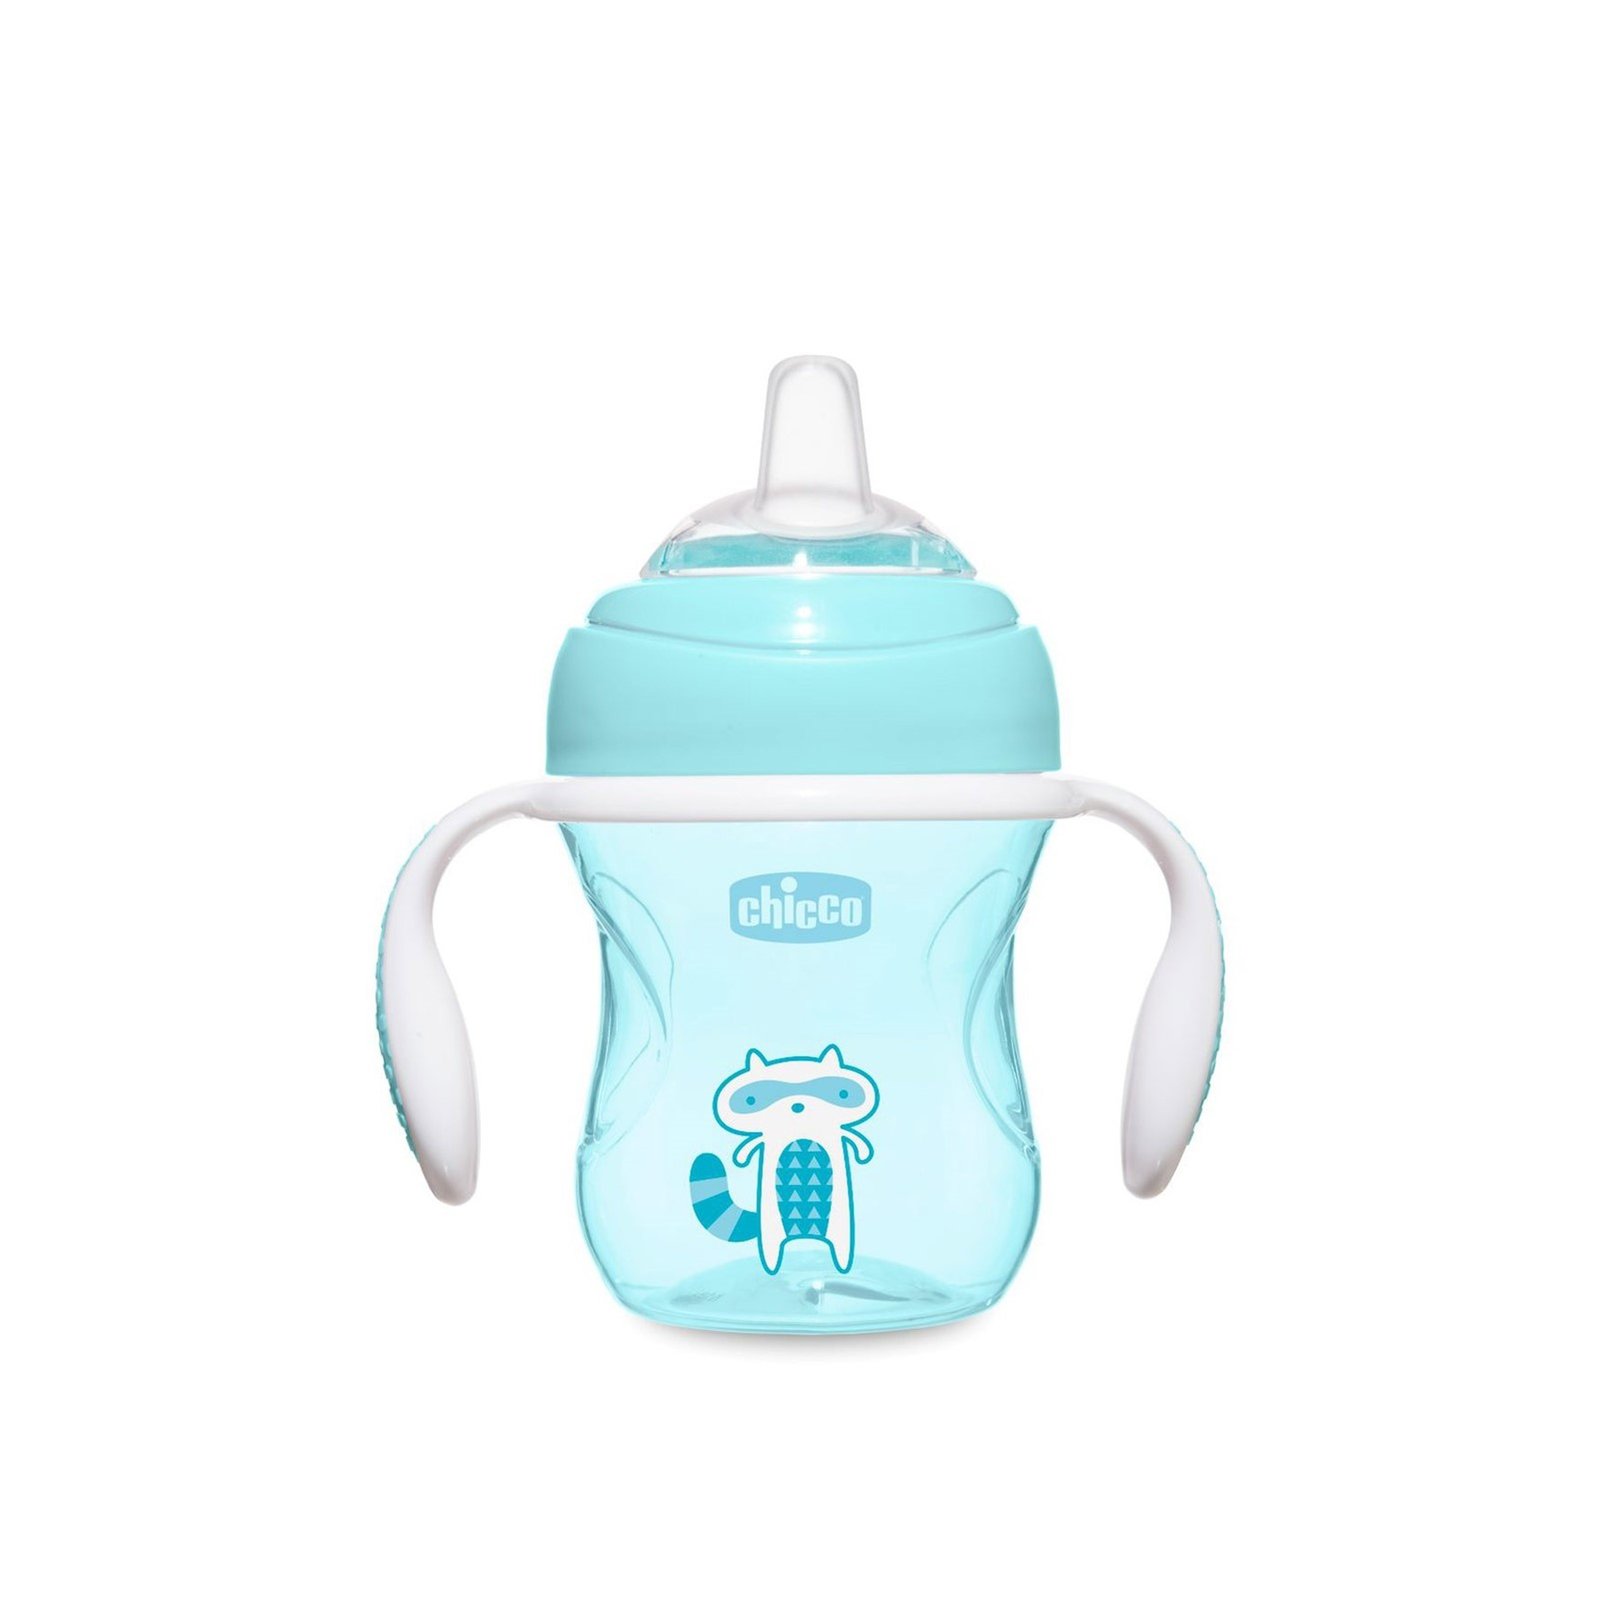 Chicco Mix & Match Transition Cup 4m+ Blue 200ml